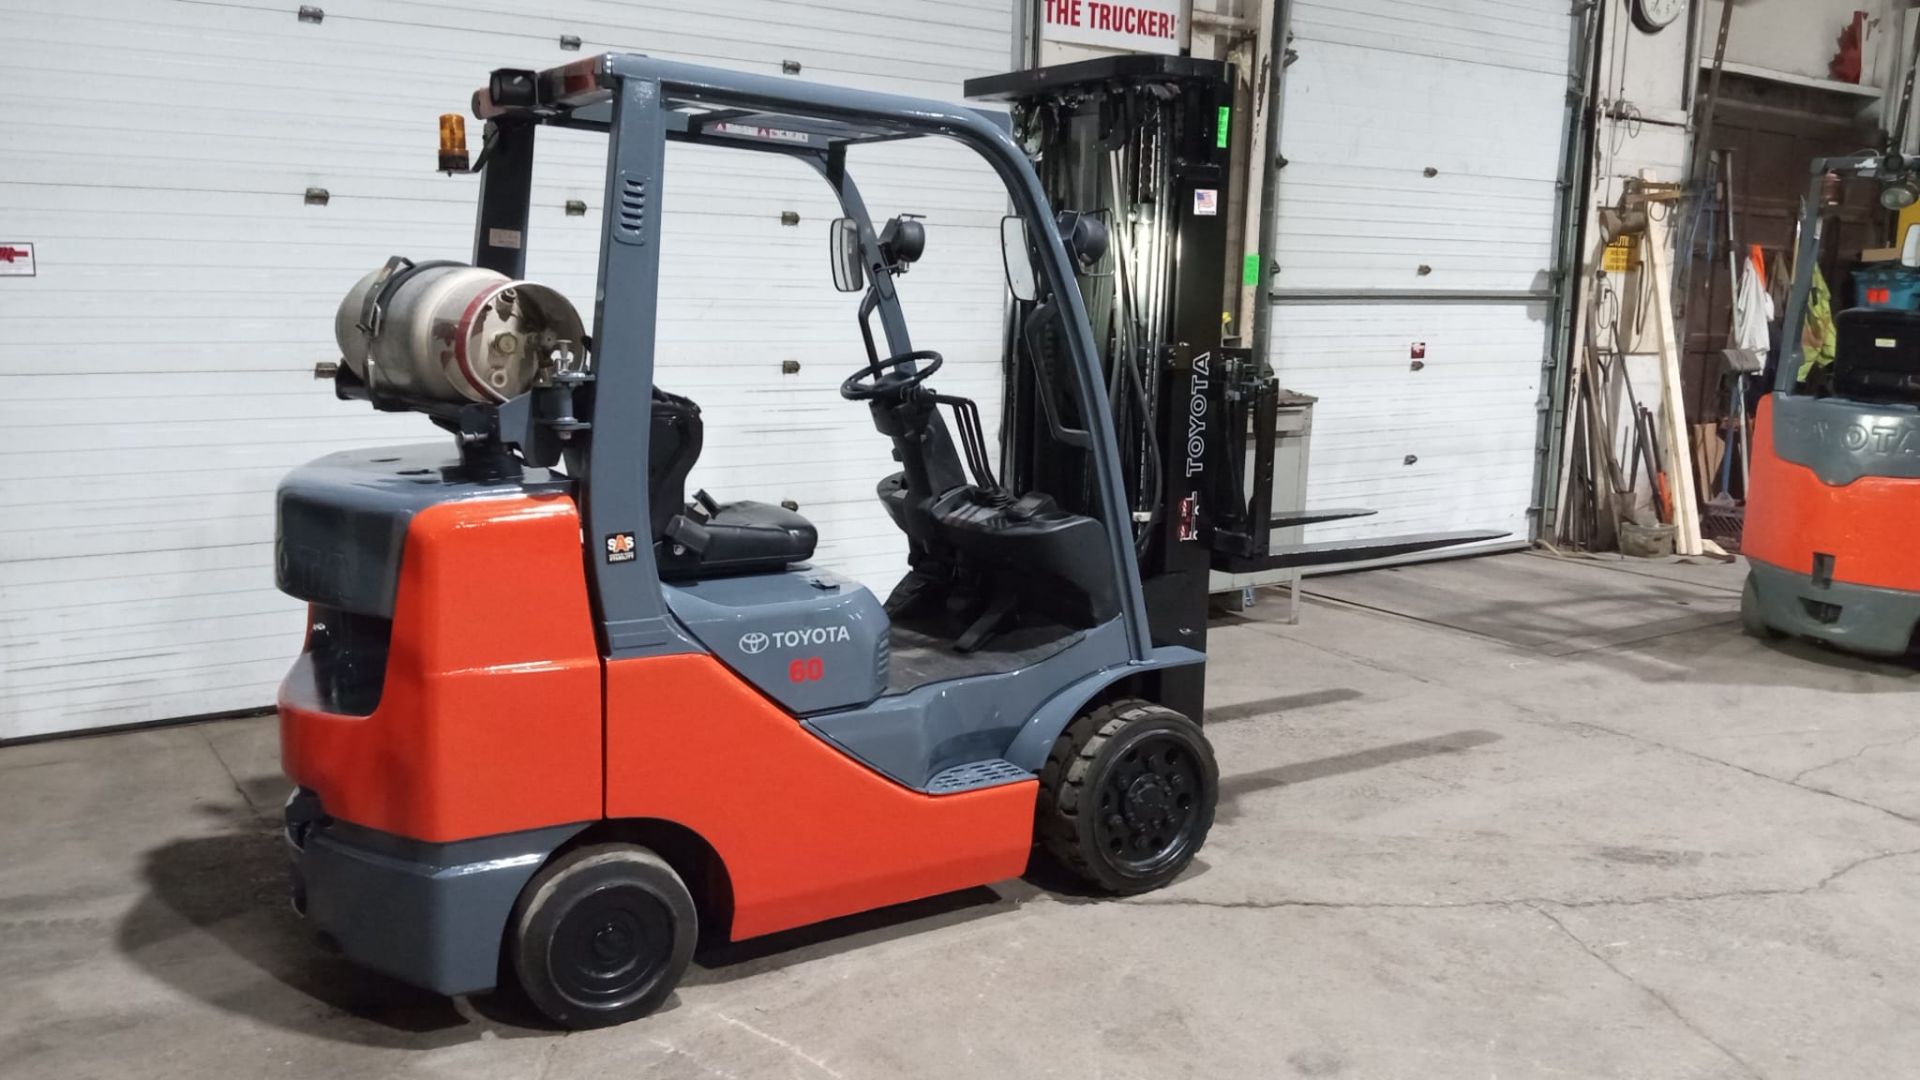 2013 TOYOTA 6,000lbs Capacity LPG (Propane) Forklift with sideshift with 3-STAGE MAST & tires with - Image 3 of 6